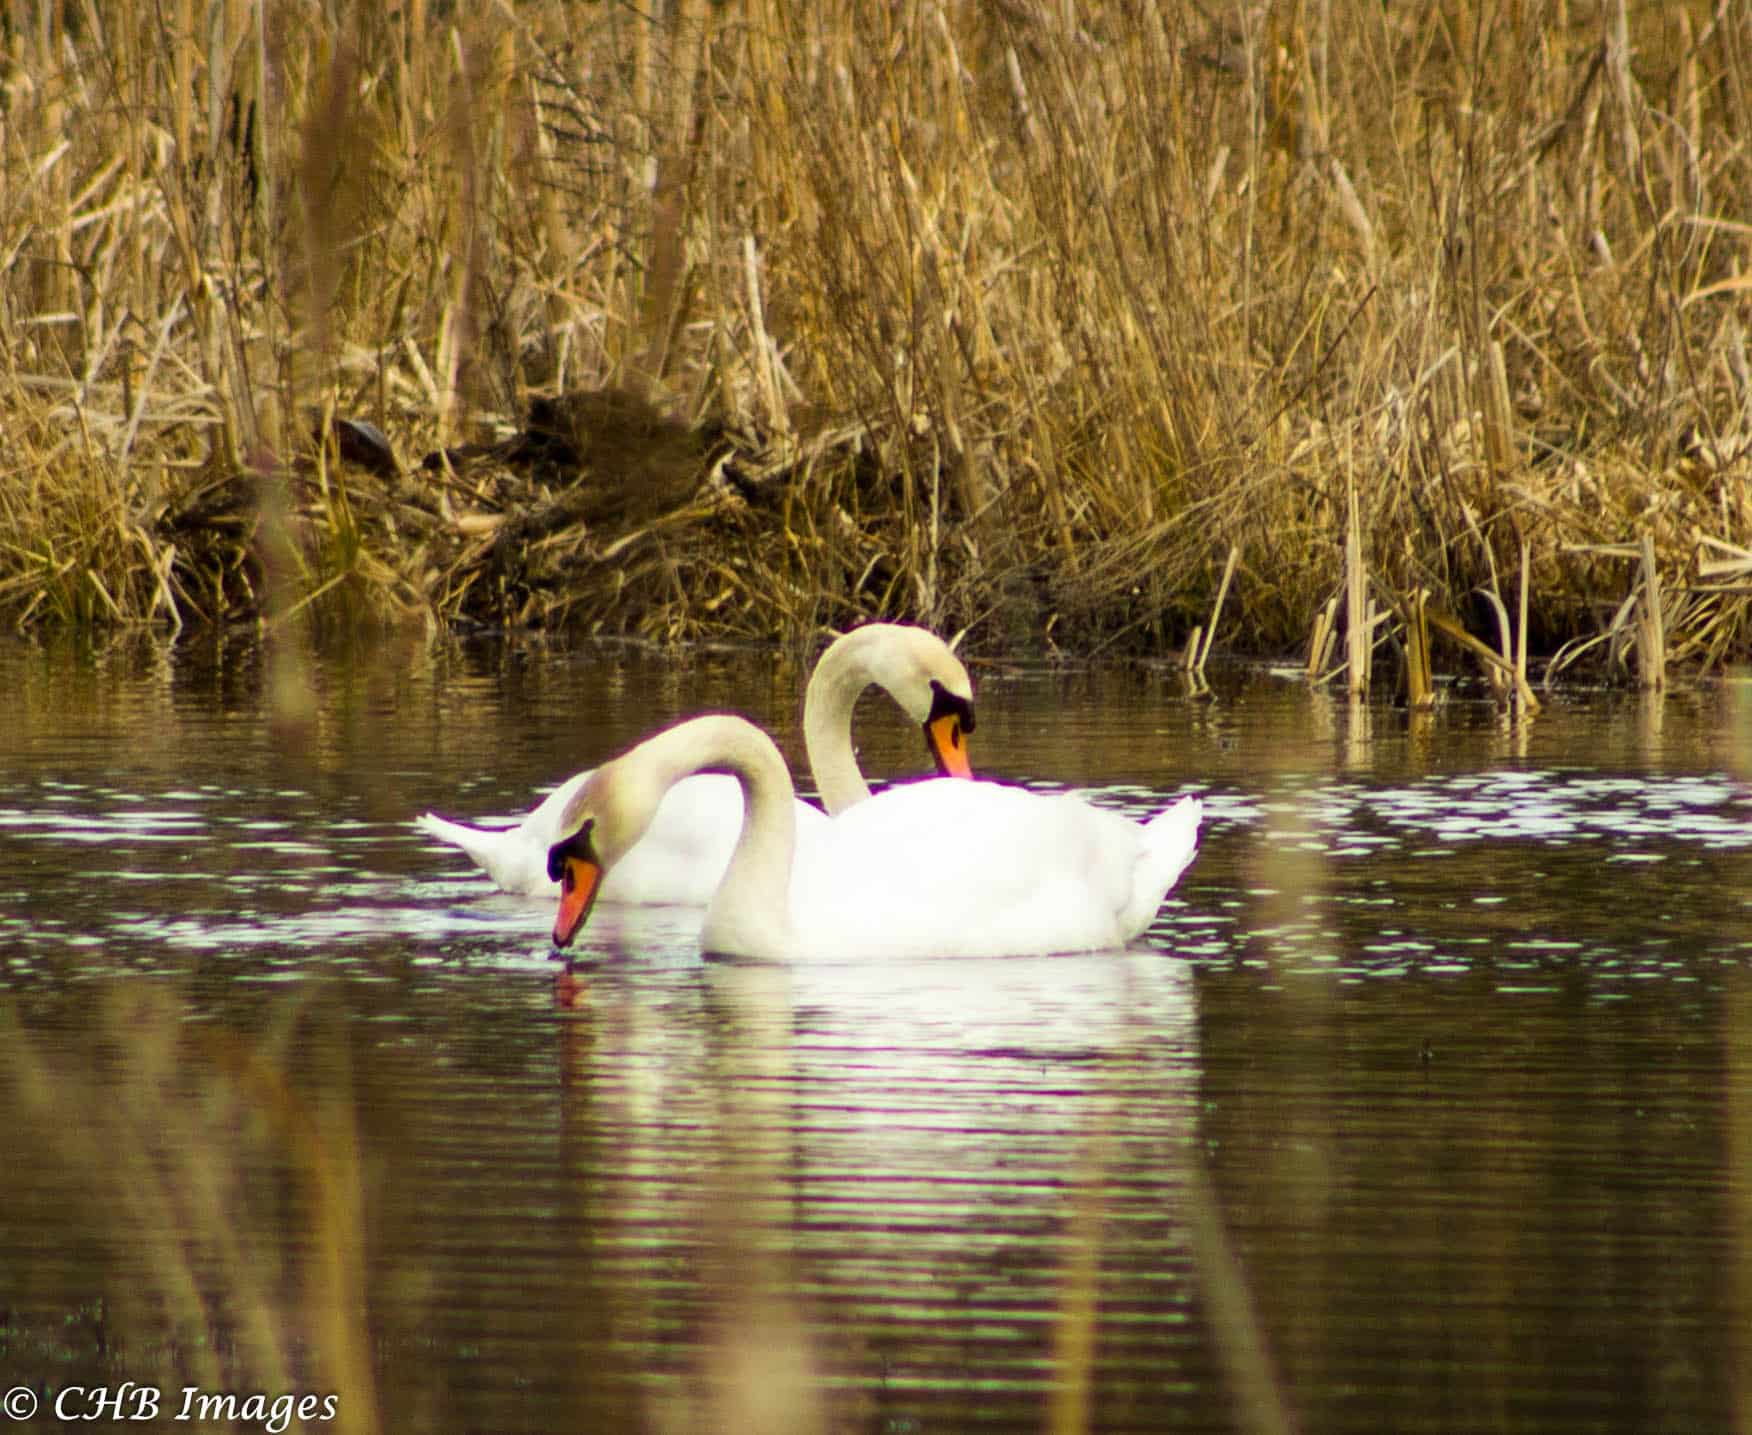 Nashua Swans | Love in April - New England